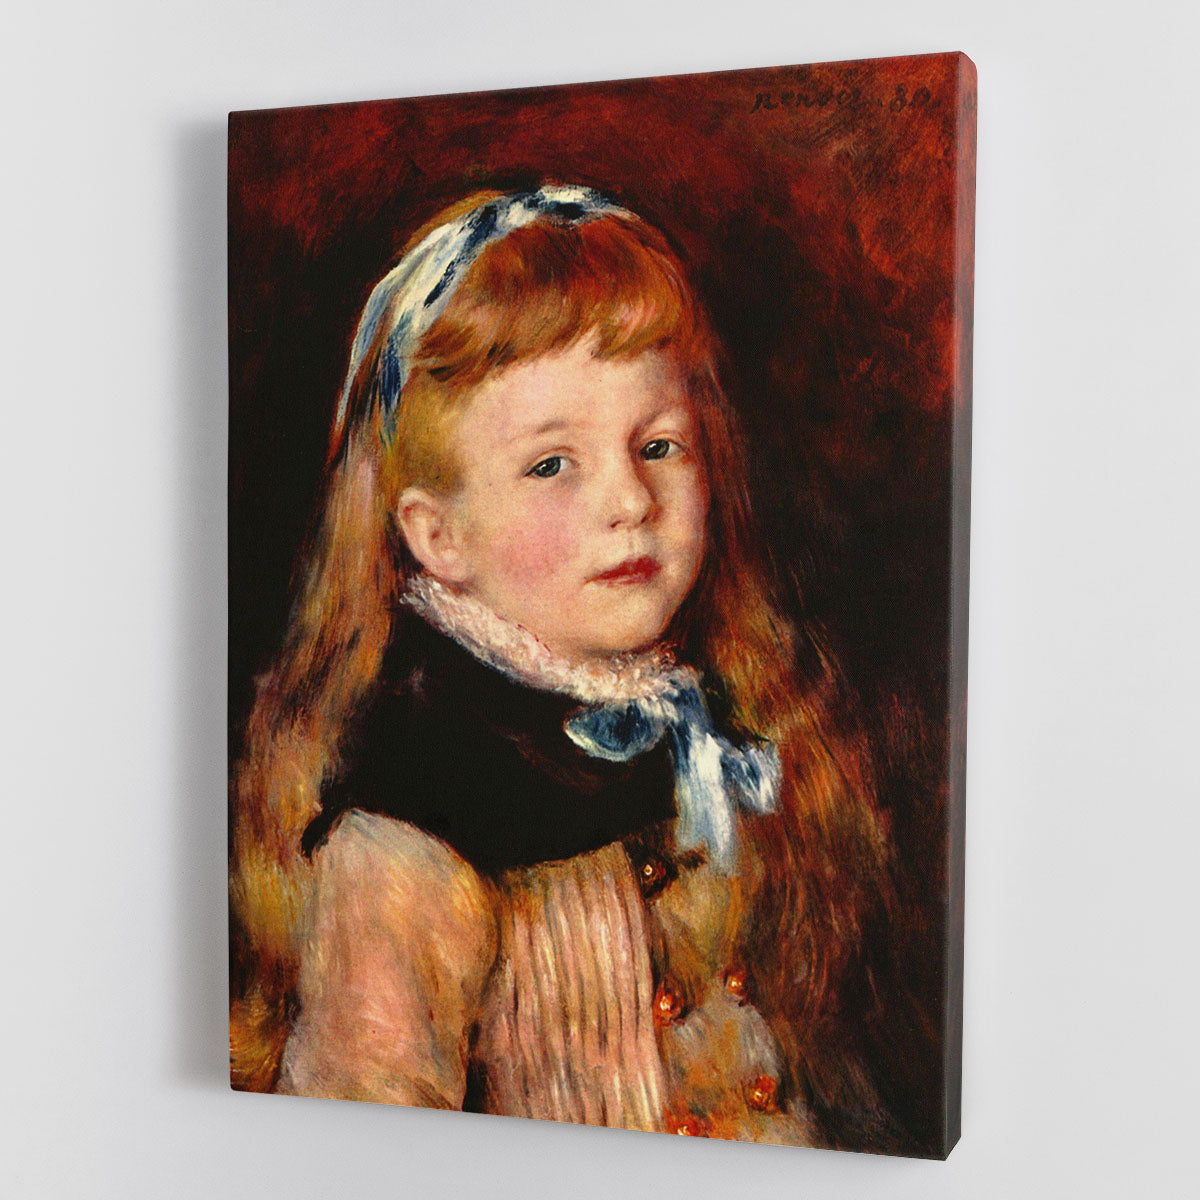 Mademoiselle Grimprel with blue hair band by Renoir Canvas Print or Poster - Canvas Art Rocks - 1